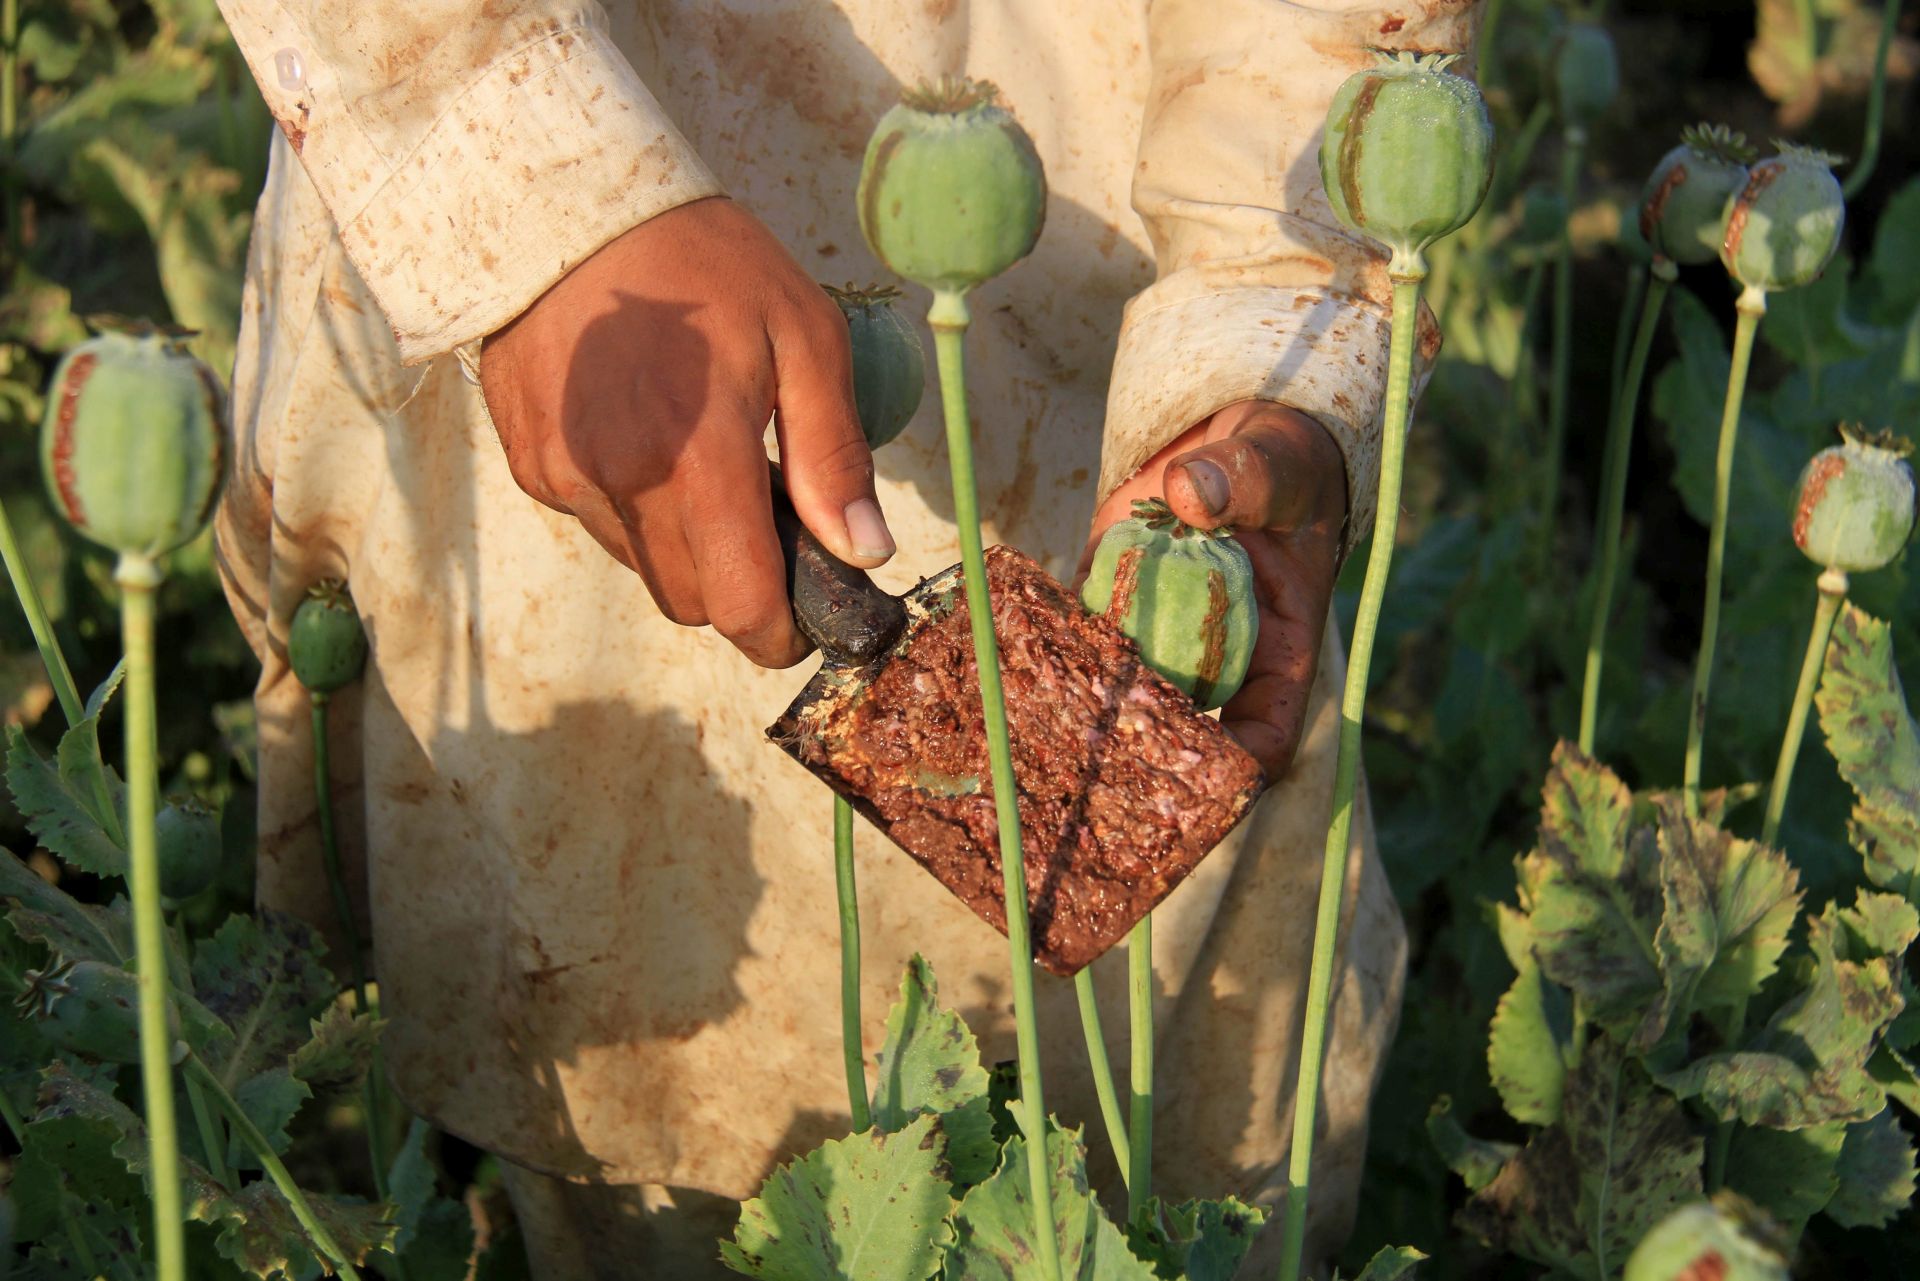 epa04723798 An Afghan farmer extracts raw opium to be processed into heroine at a poppy field in Jalalabad, Afghanistan, 28 April 2015. Afghanistan is still listed as world's largest opium producer, although the UN Office on Drugs and Crime (UNODC) in a report in December 2014 said that the cultivation area for opium poppy in Myanmar and Laos has increased for the eighth consecutive year, to now 63,800 hectares making Myanmar Southeast Asia's top opium producer.  EPA/GHULAMULLAH HABIBI